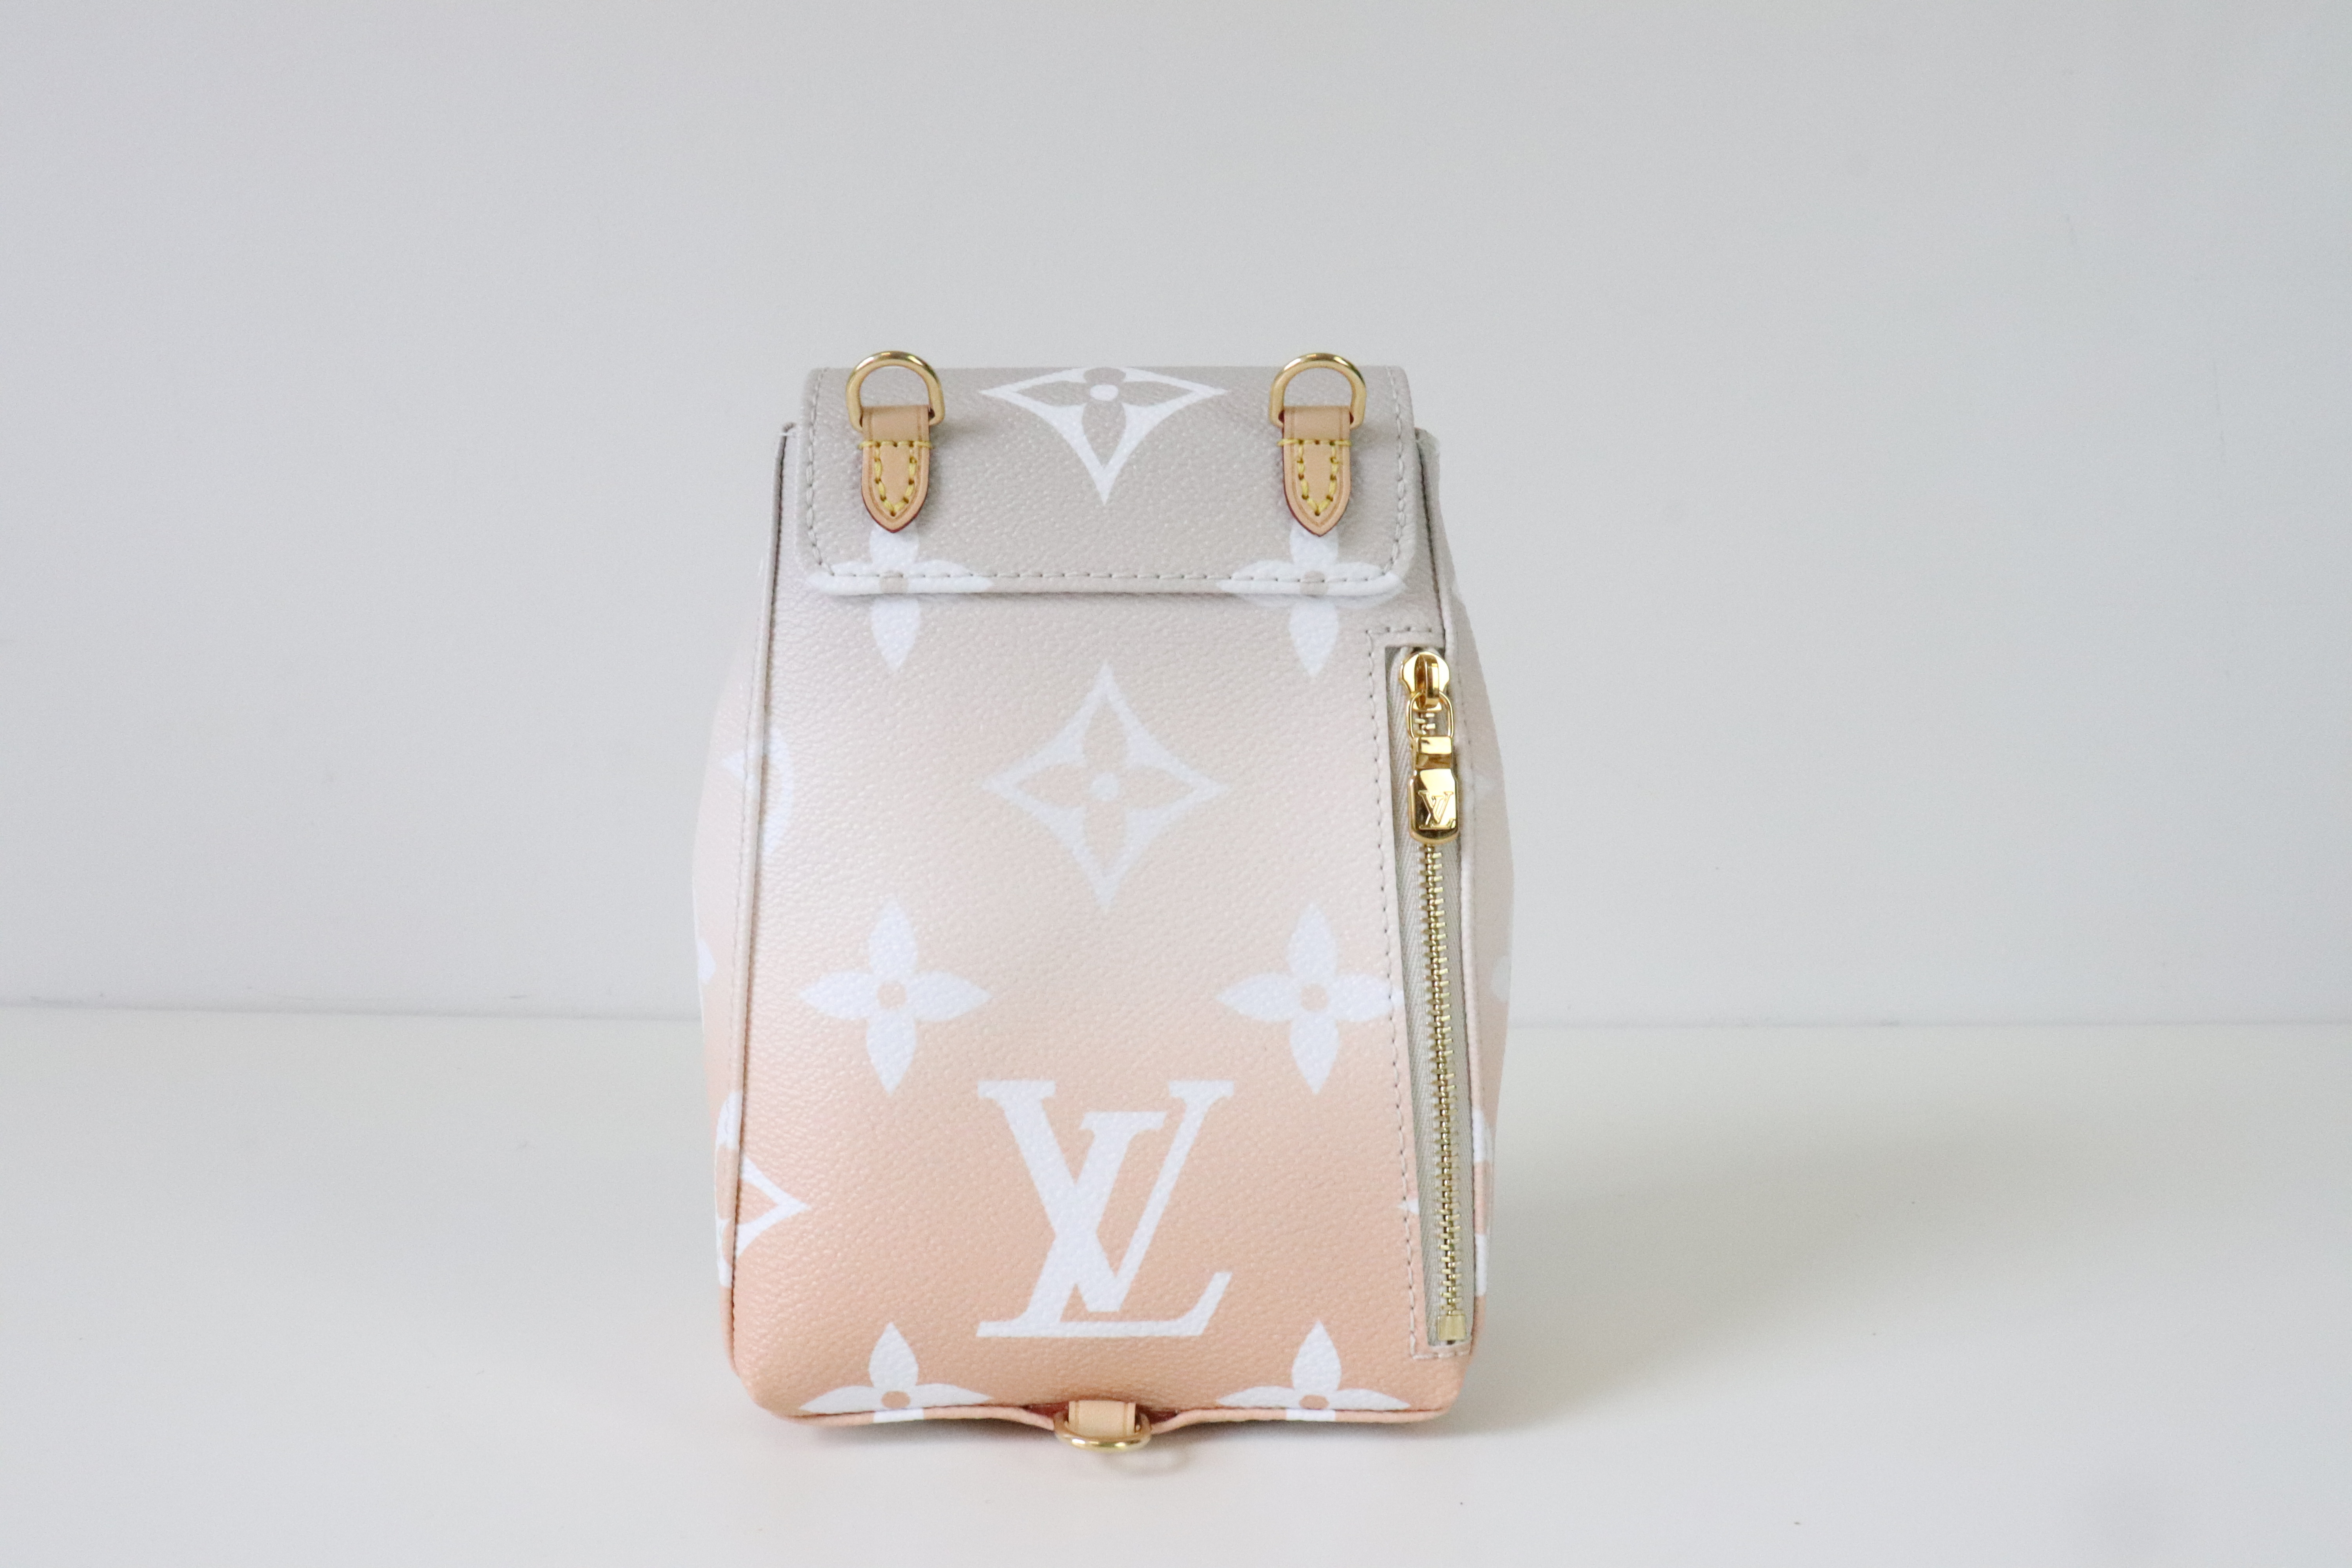  Louis Vuitton M45764 Monogram Tiny Backpack, 2-Way, Mini  Backpack, Shoulder Bag, gri bloom : Clothing, Shoes & Jewelry